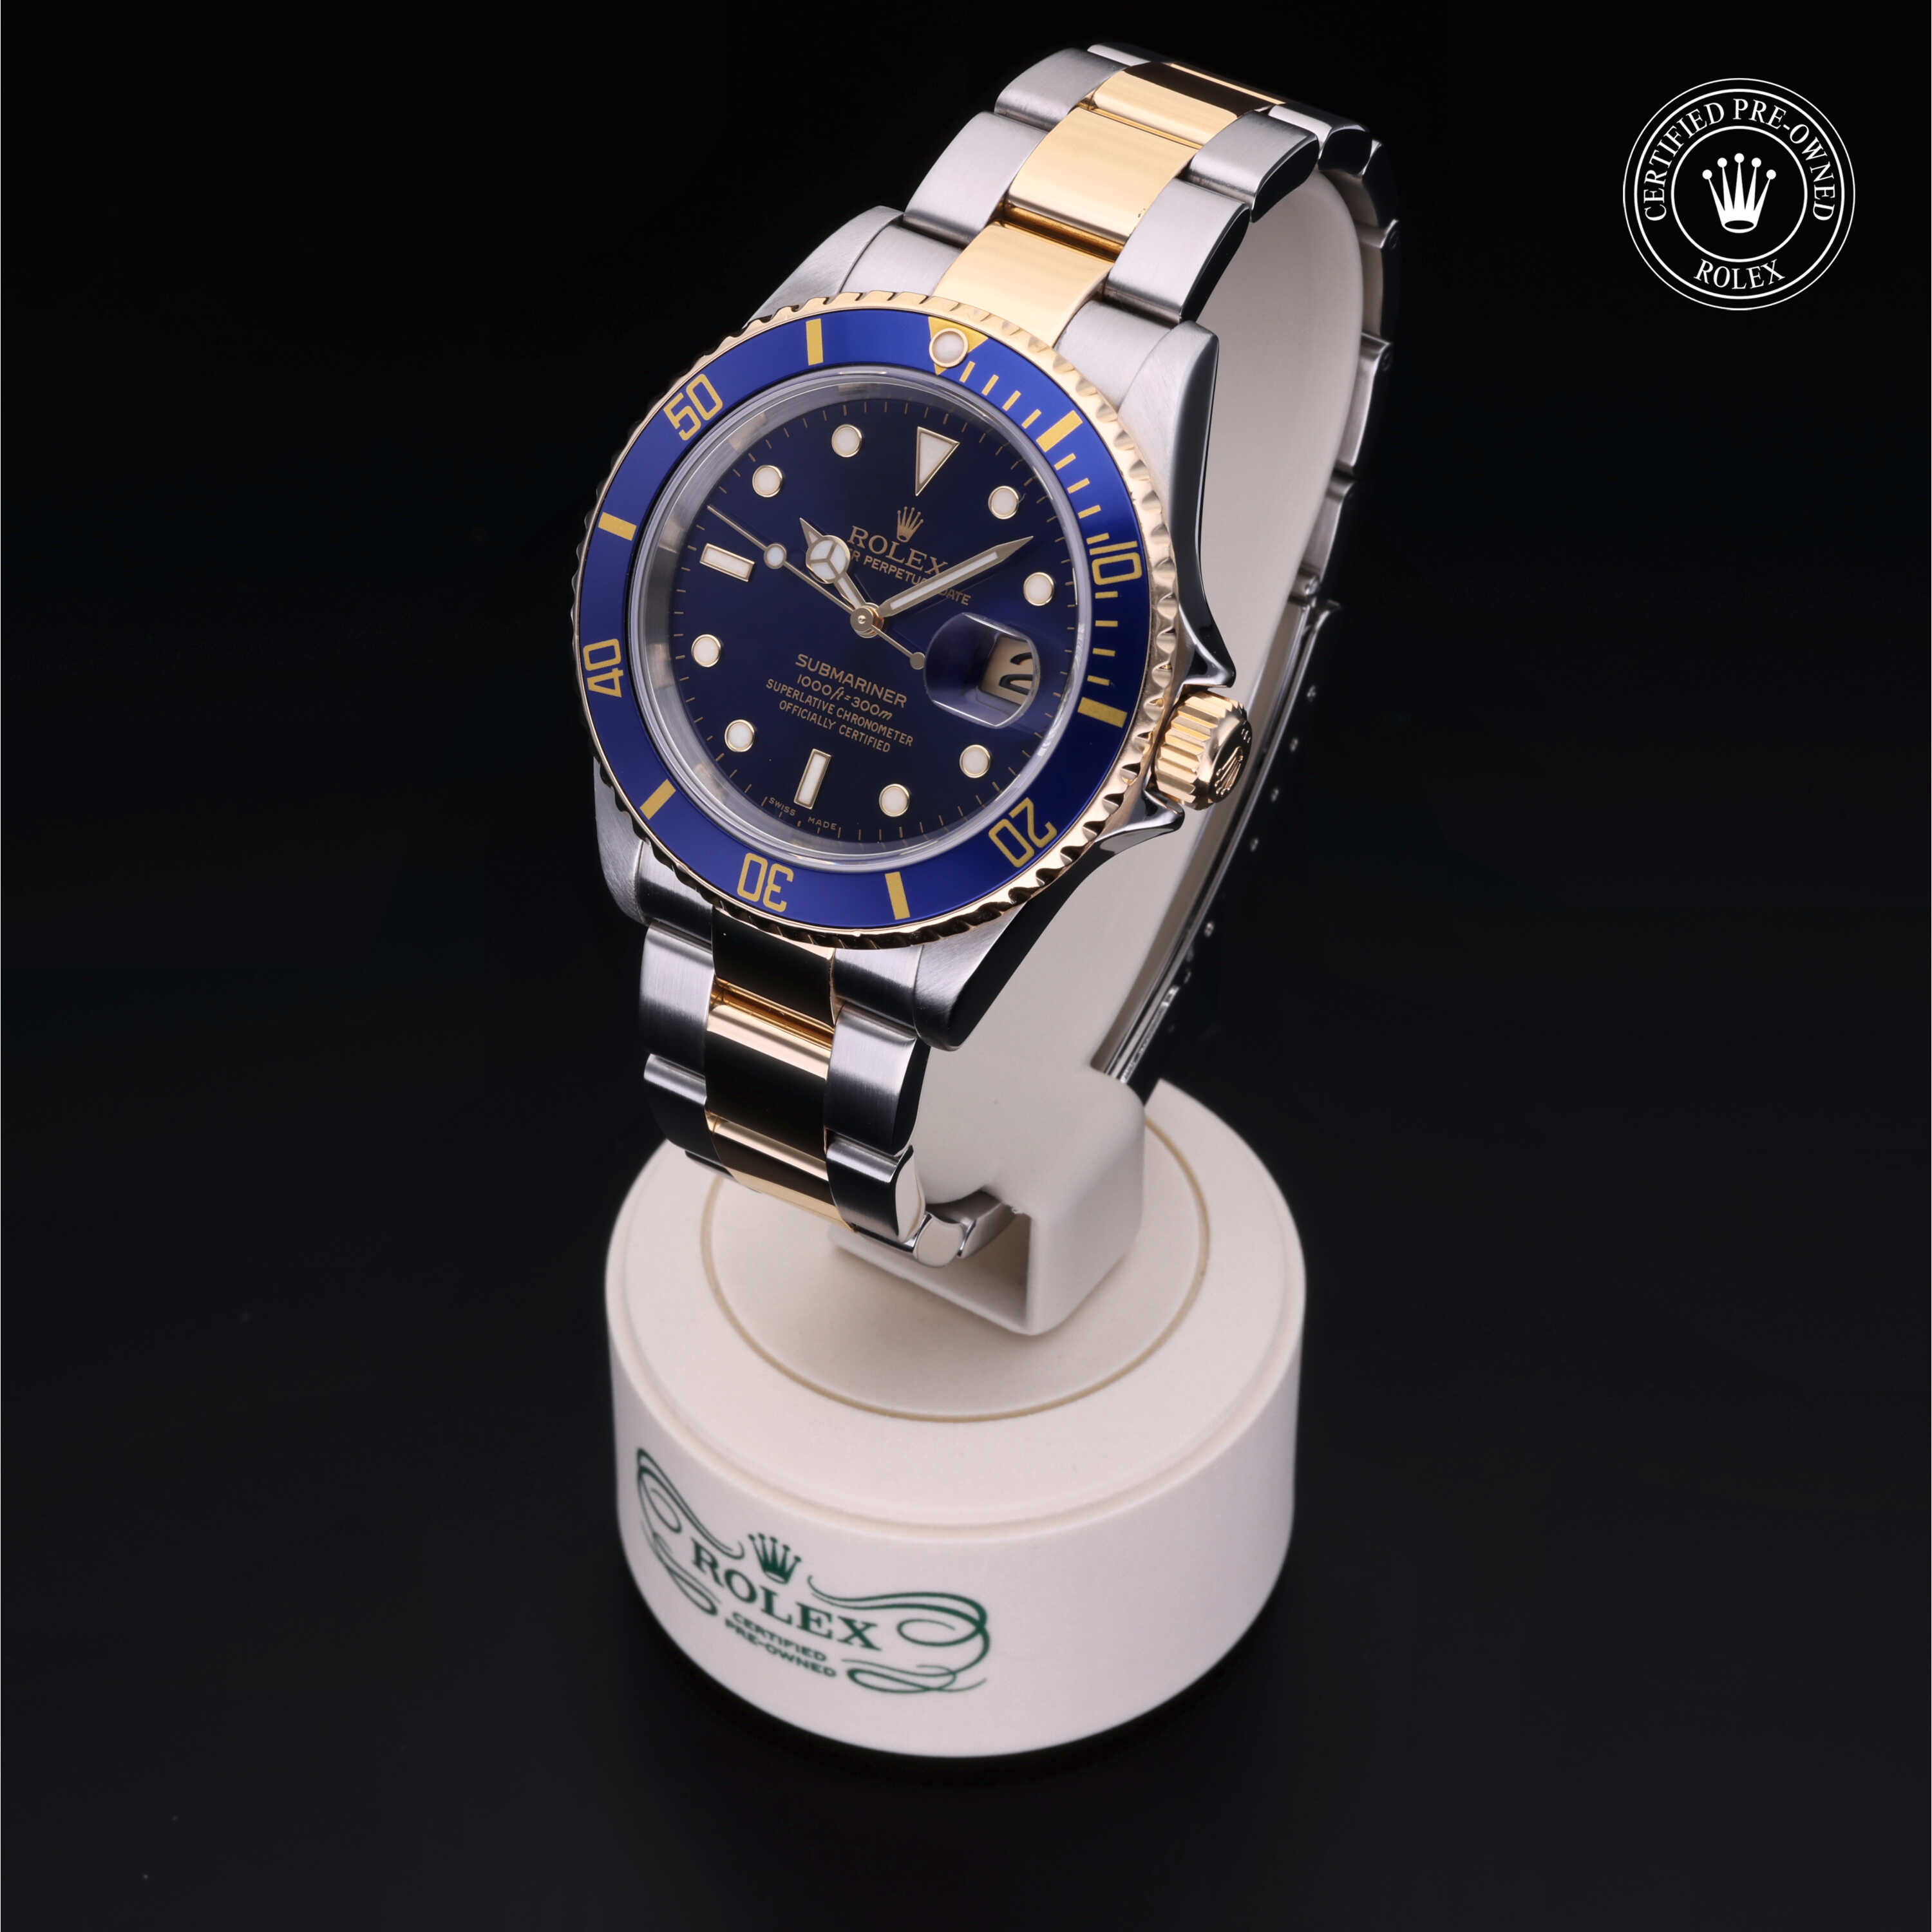 Rolex Submariner in Oystersteel and yellow gold M16613-0015 at Wilson & Son Jewelers